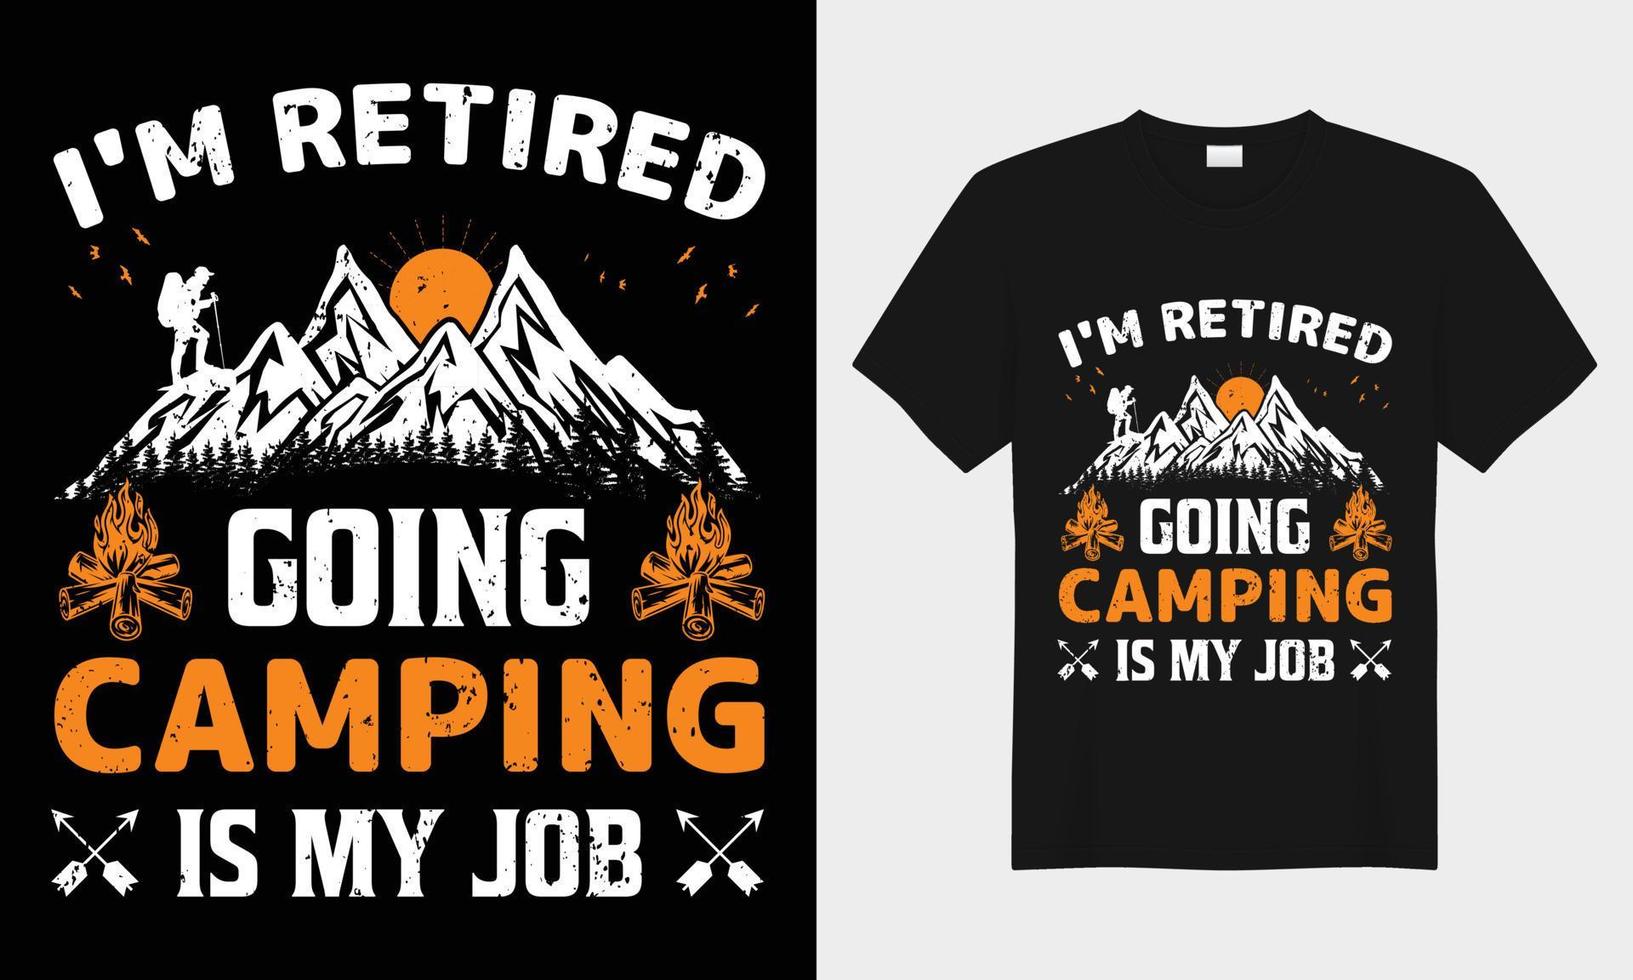 I'm Retired Going Camping is my Job, vector typography t-shirt design